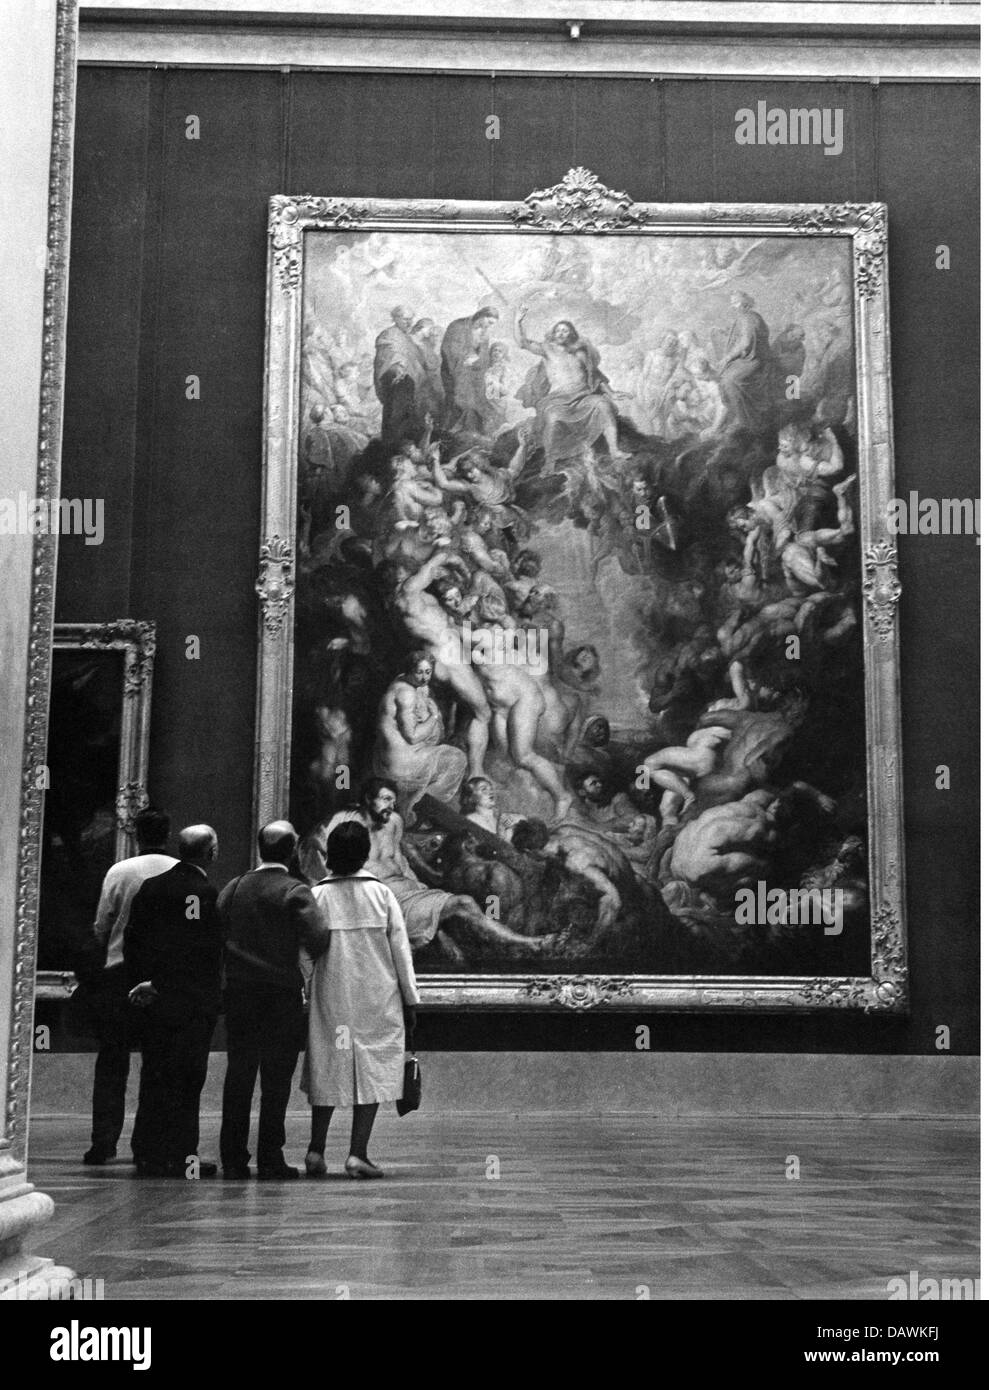 geography / travel, Germany, Munich, museums, Alte Pinakothek, interior view, Rubens hall, circa 1960, , Additional-Rights-Clearences-Not Available Stock Photo